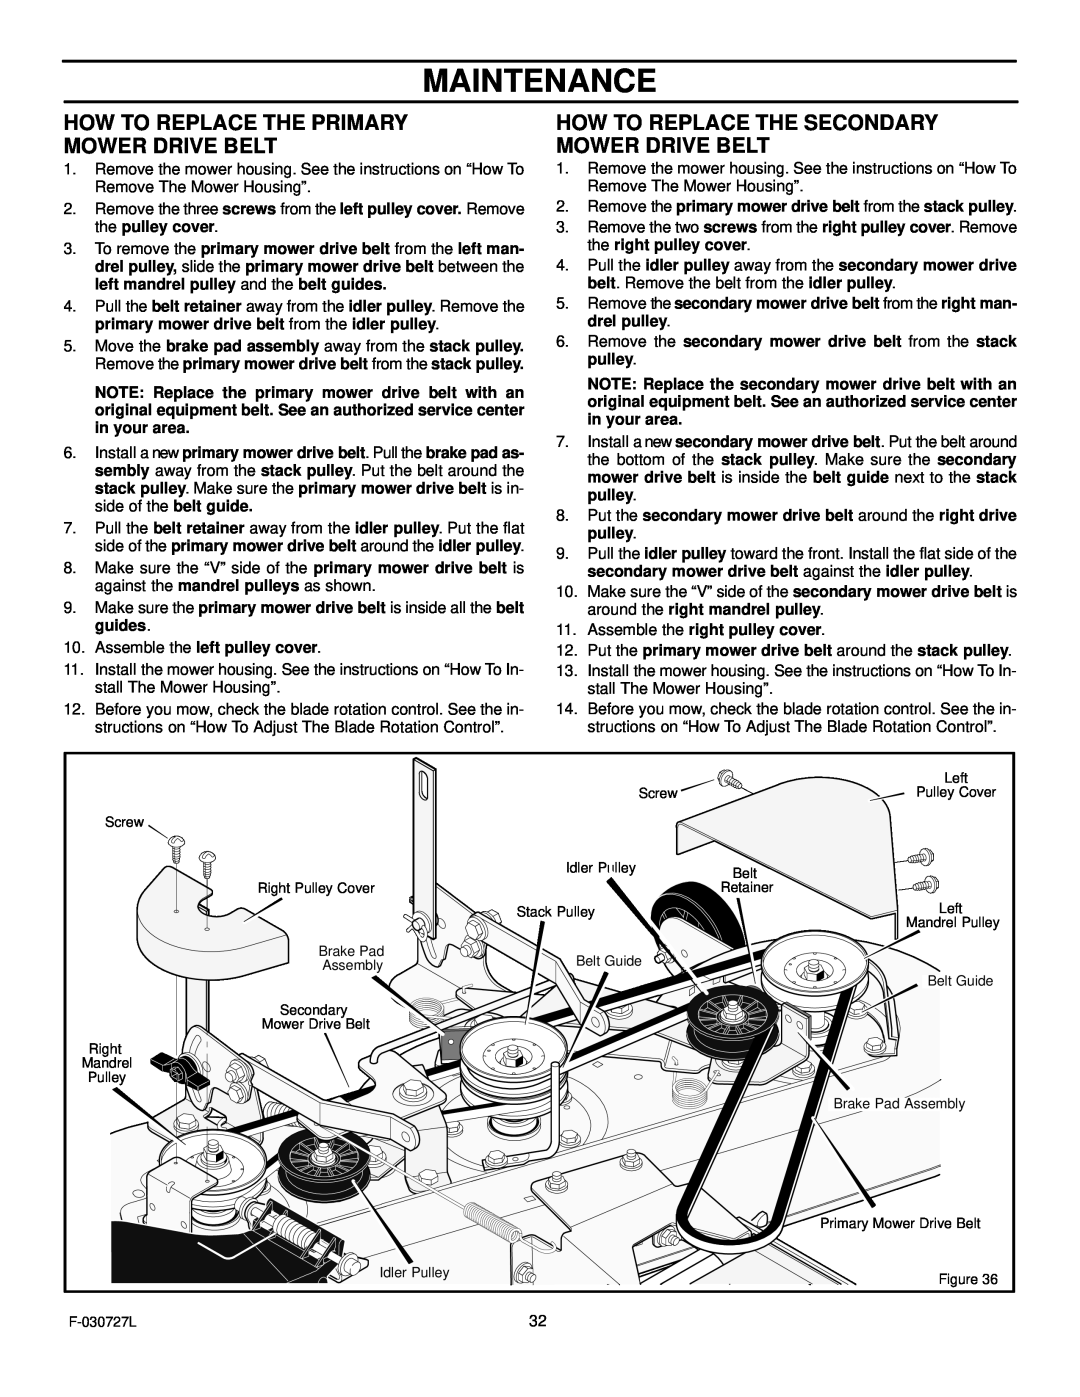 Murray 465600x8A Maintenance, How To Replace The Primary Mower Drive Belt, How To Replace The Secondary Mower Drive Belt 